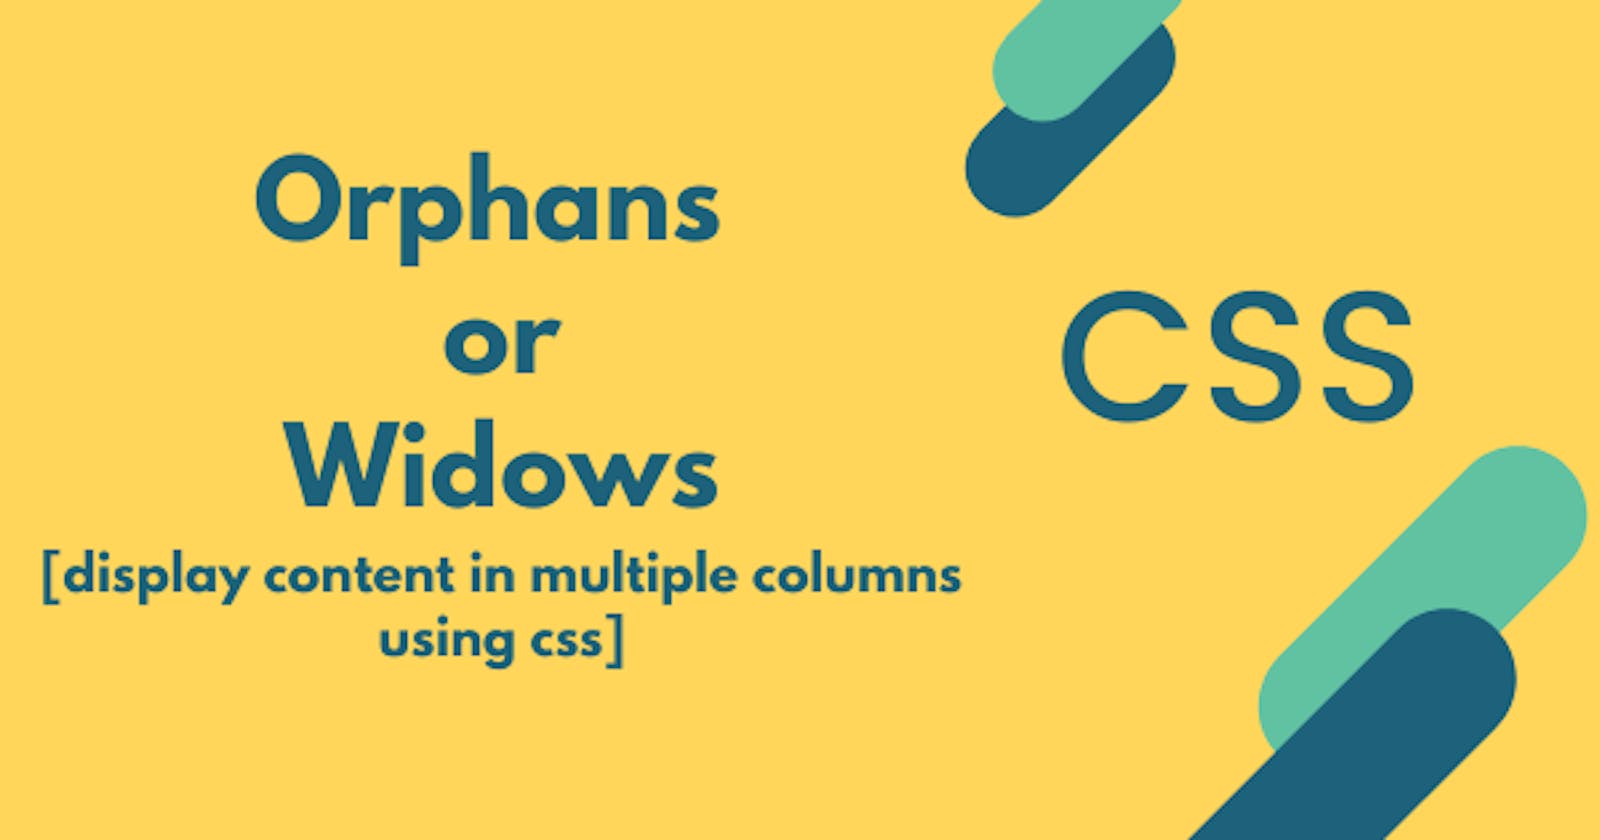 How to display content in multiple columns using CSS